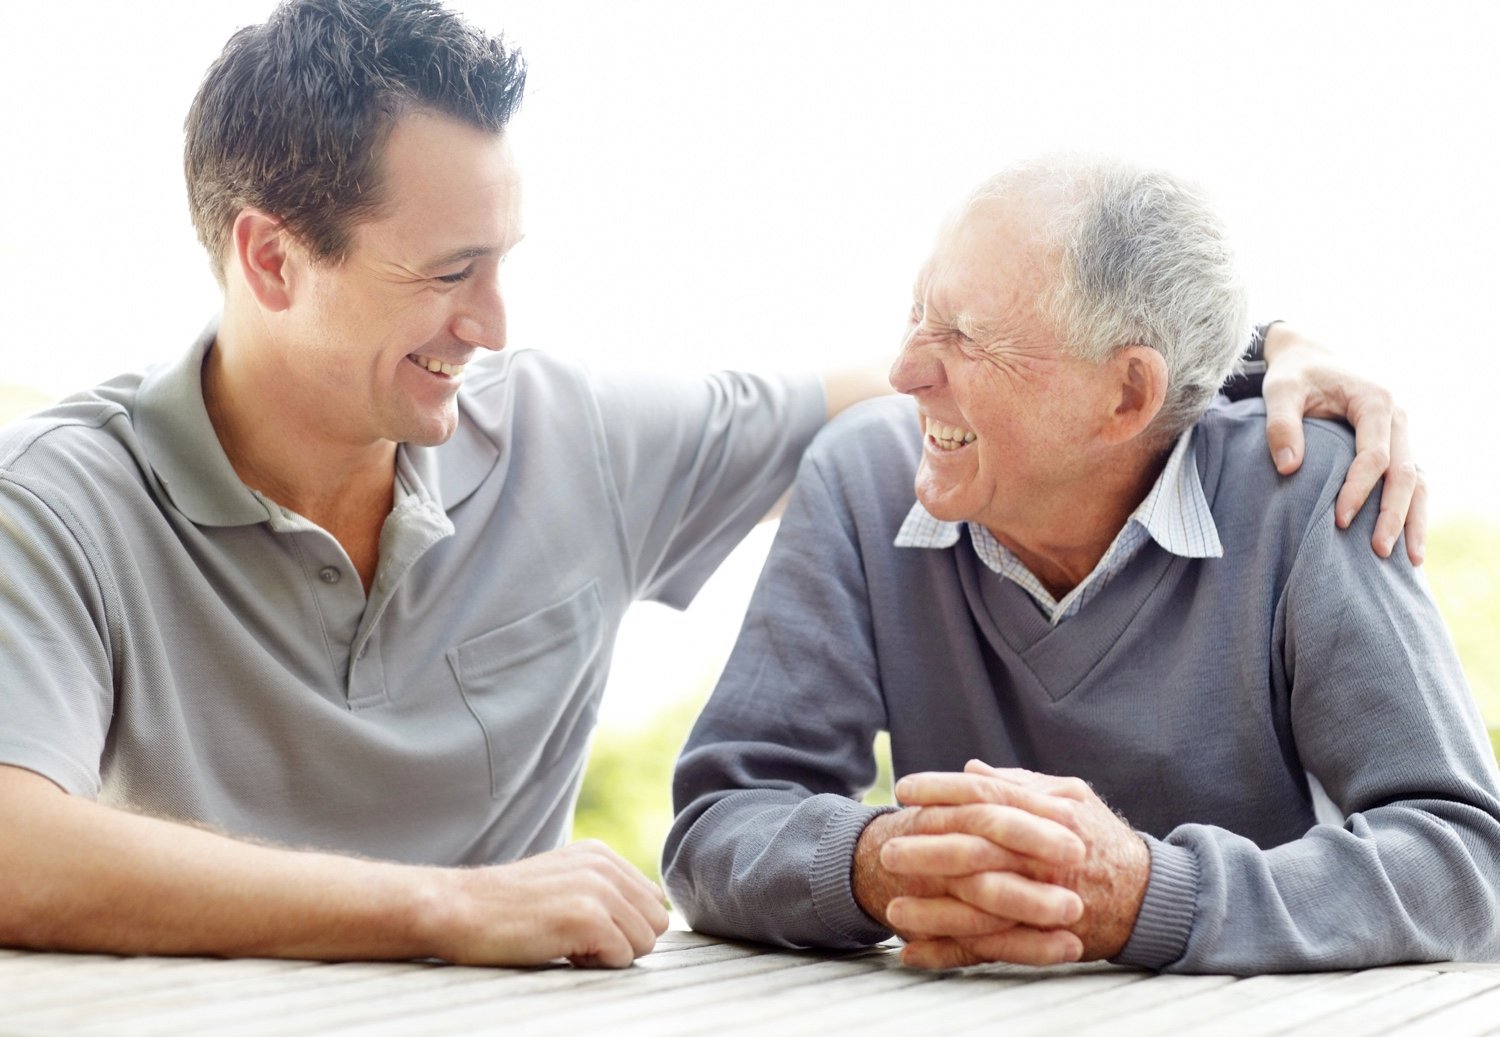 A caregiver with his arm around a senior resident's shoulder as they smile at each other